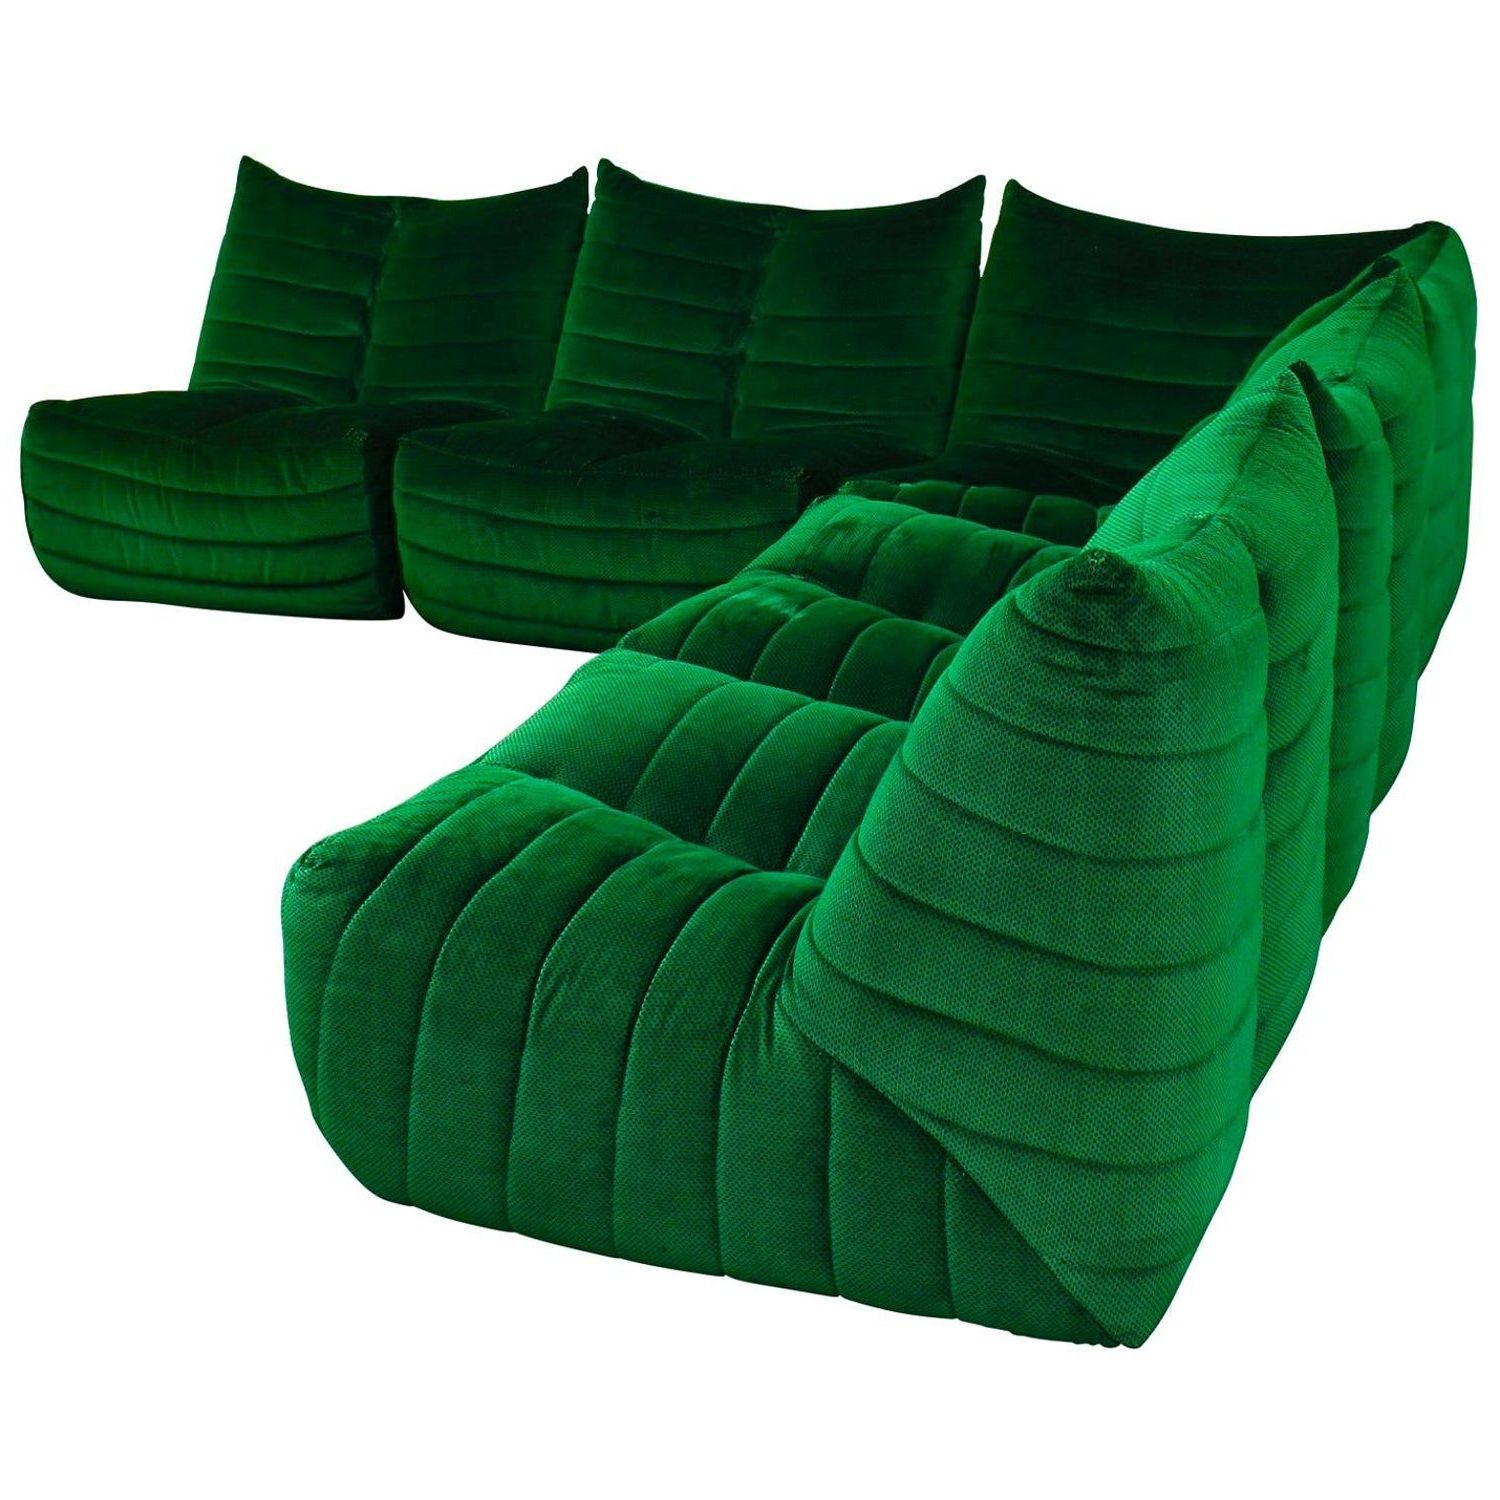 Sectional Sofa In Green Velvetgianfranco Grignani, Italy, Circa Pertaining To Well Known Green Velvet Modular Sectionals (View 9 of 15)